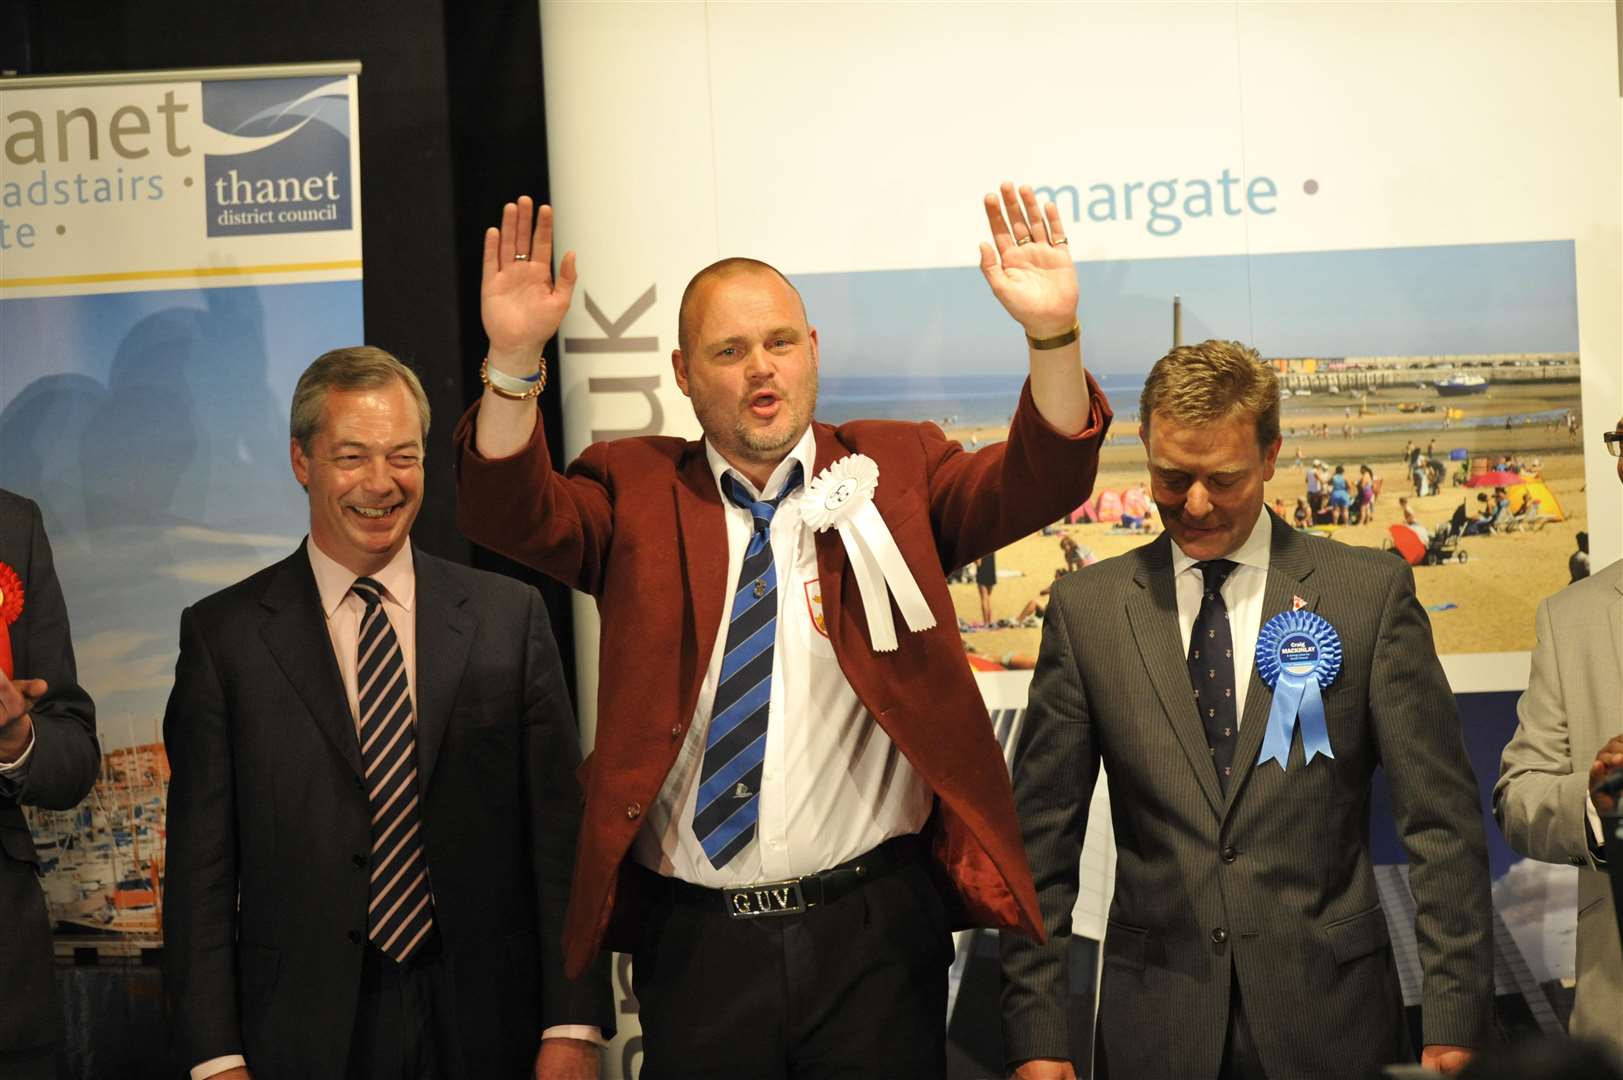 Craig Mackinlay, right, at the count for the 2015 general election when he beat comedian Al Murray, centre, and former Ukip leader Nigel Farage to the South Thanet seat